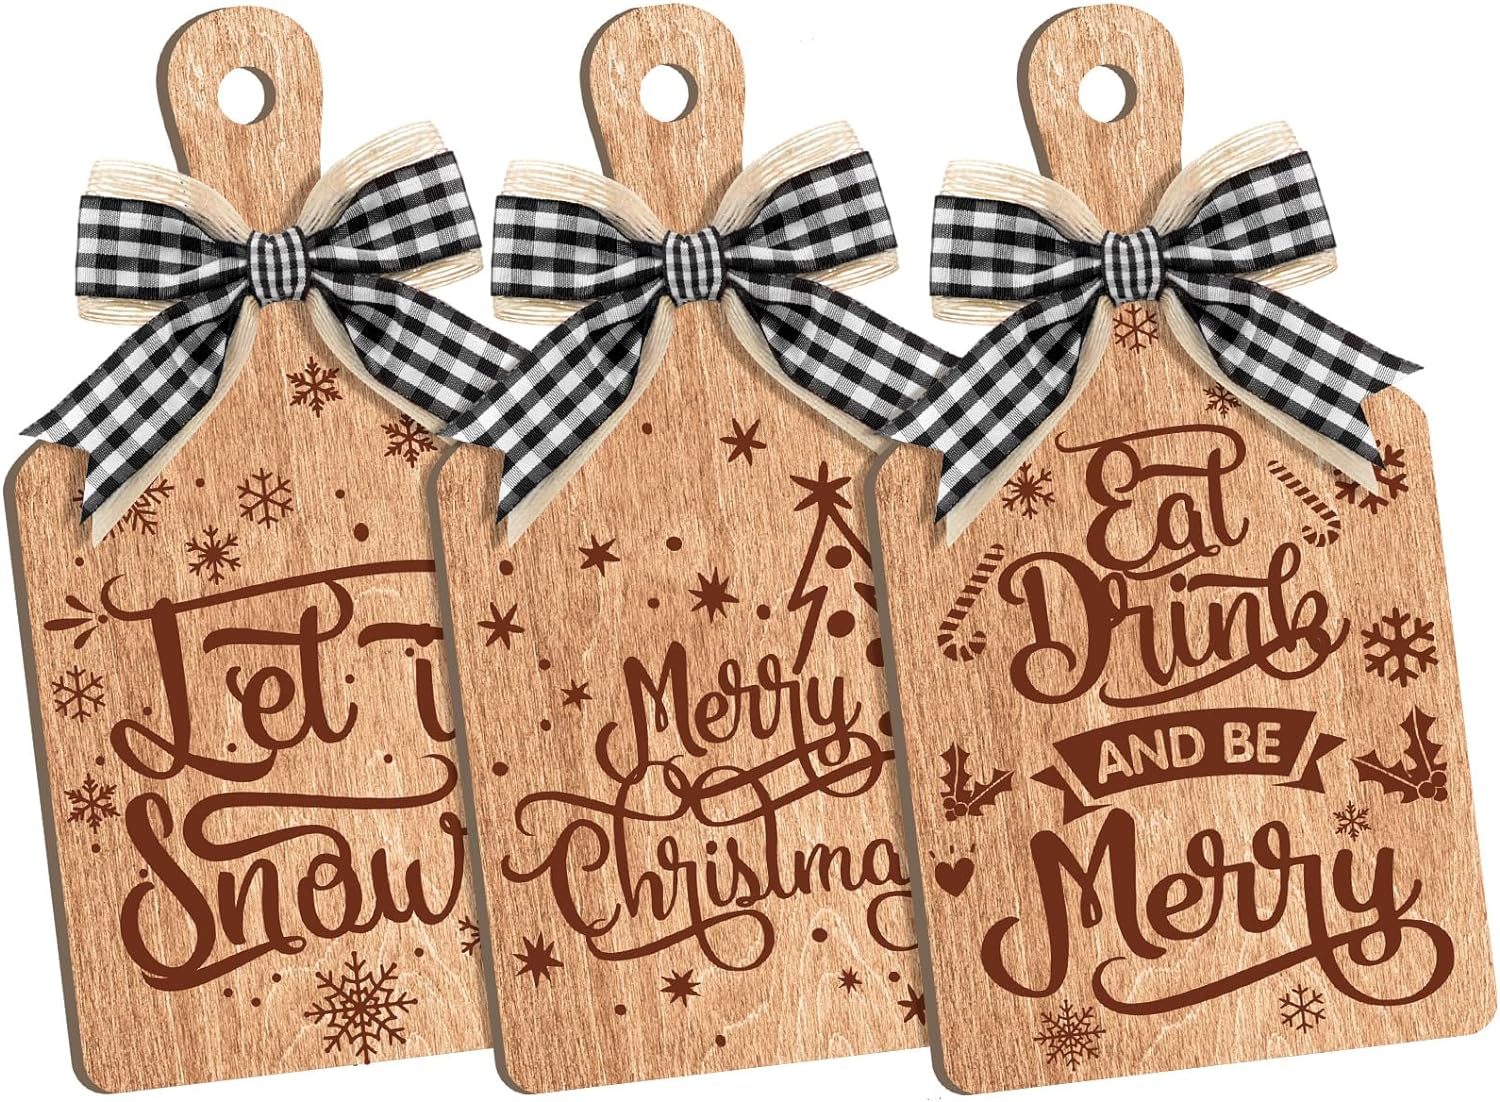 Umigy 3 Pcs Merry Christmas Decor Let It Snow Decor Christmas Decorative Wood Cutting Board Farmhouse Table Shelf Decorations Wooden Home Decor Christmas Kitchen Gifts